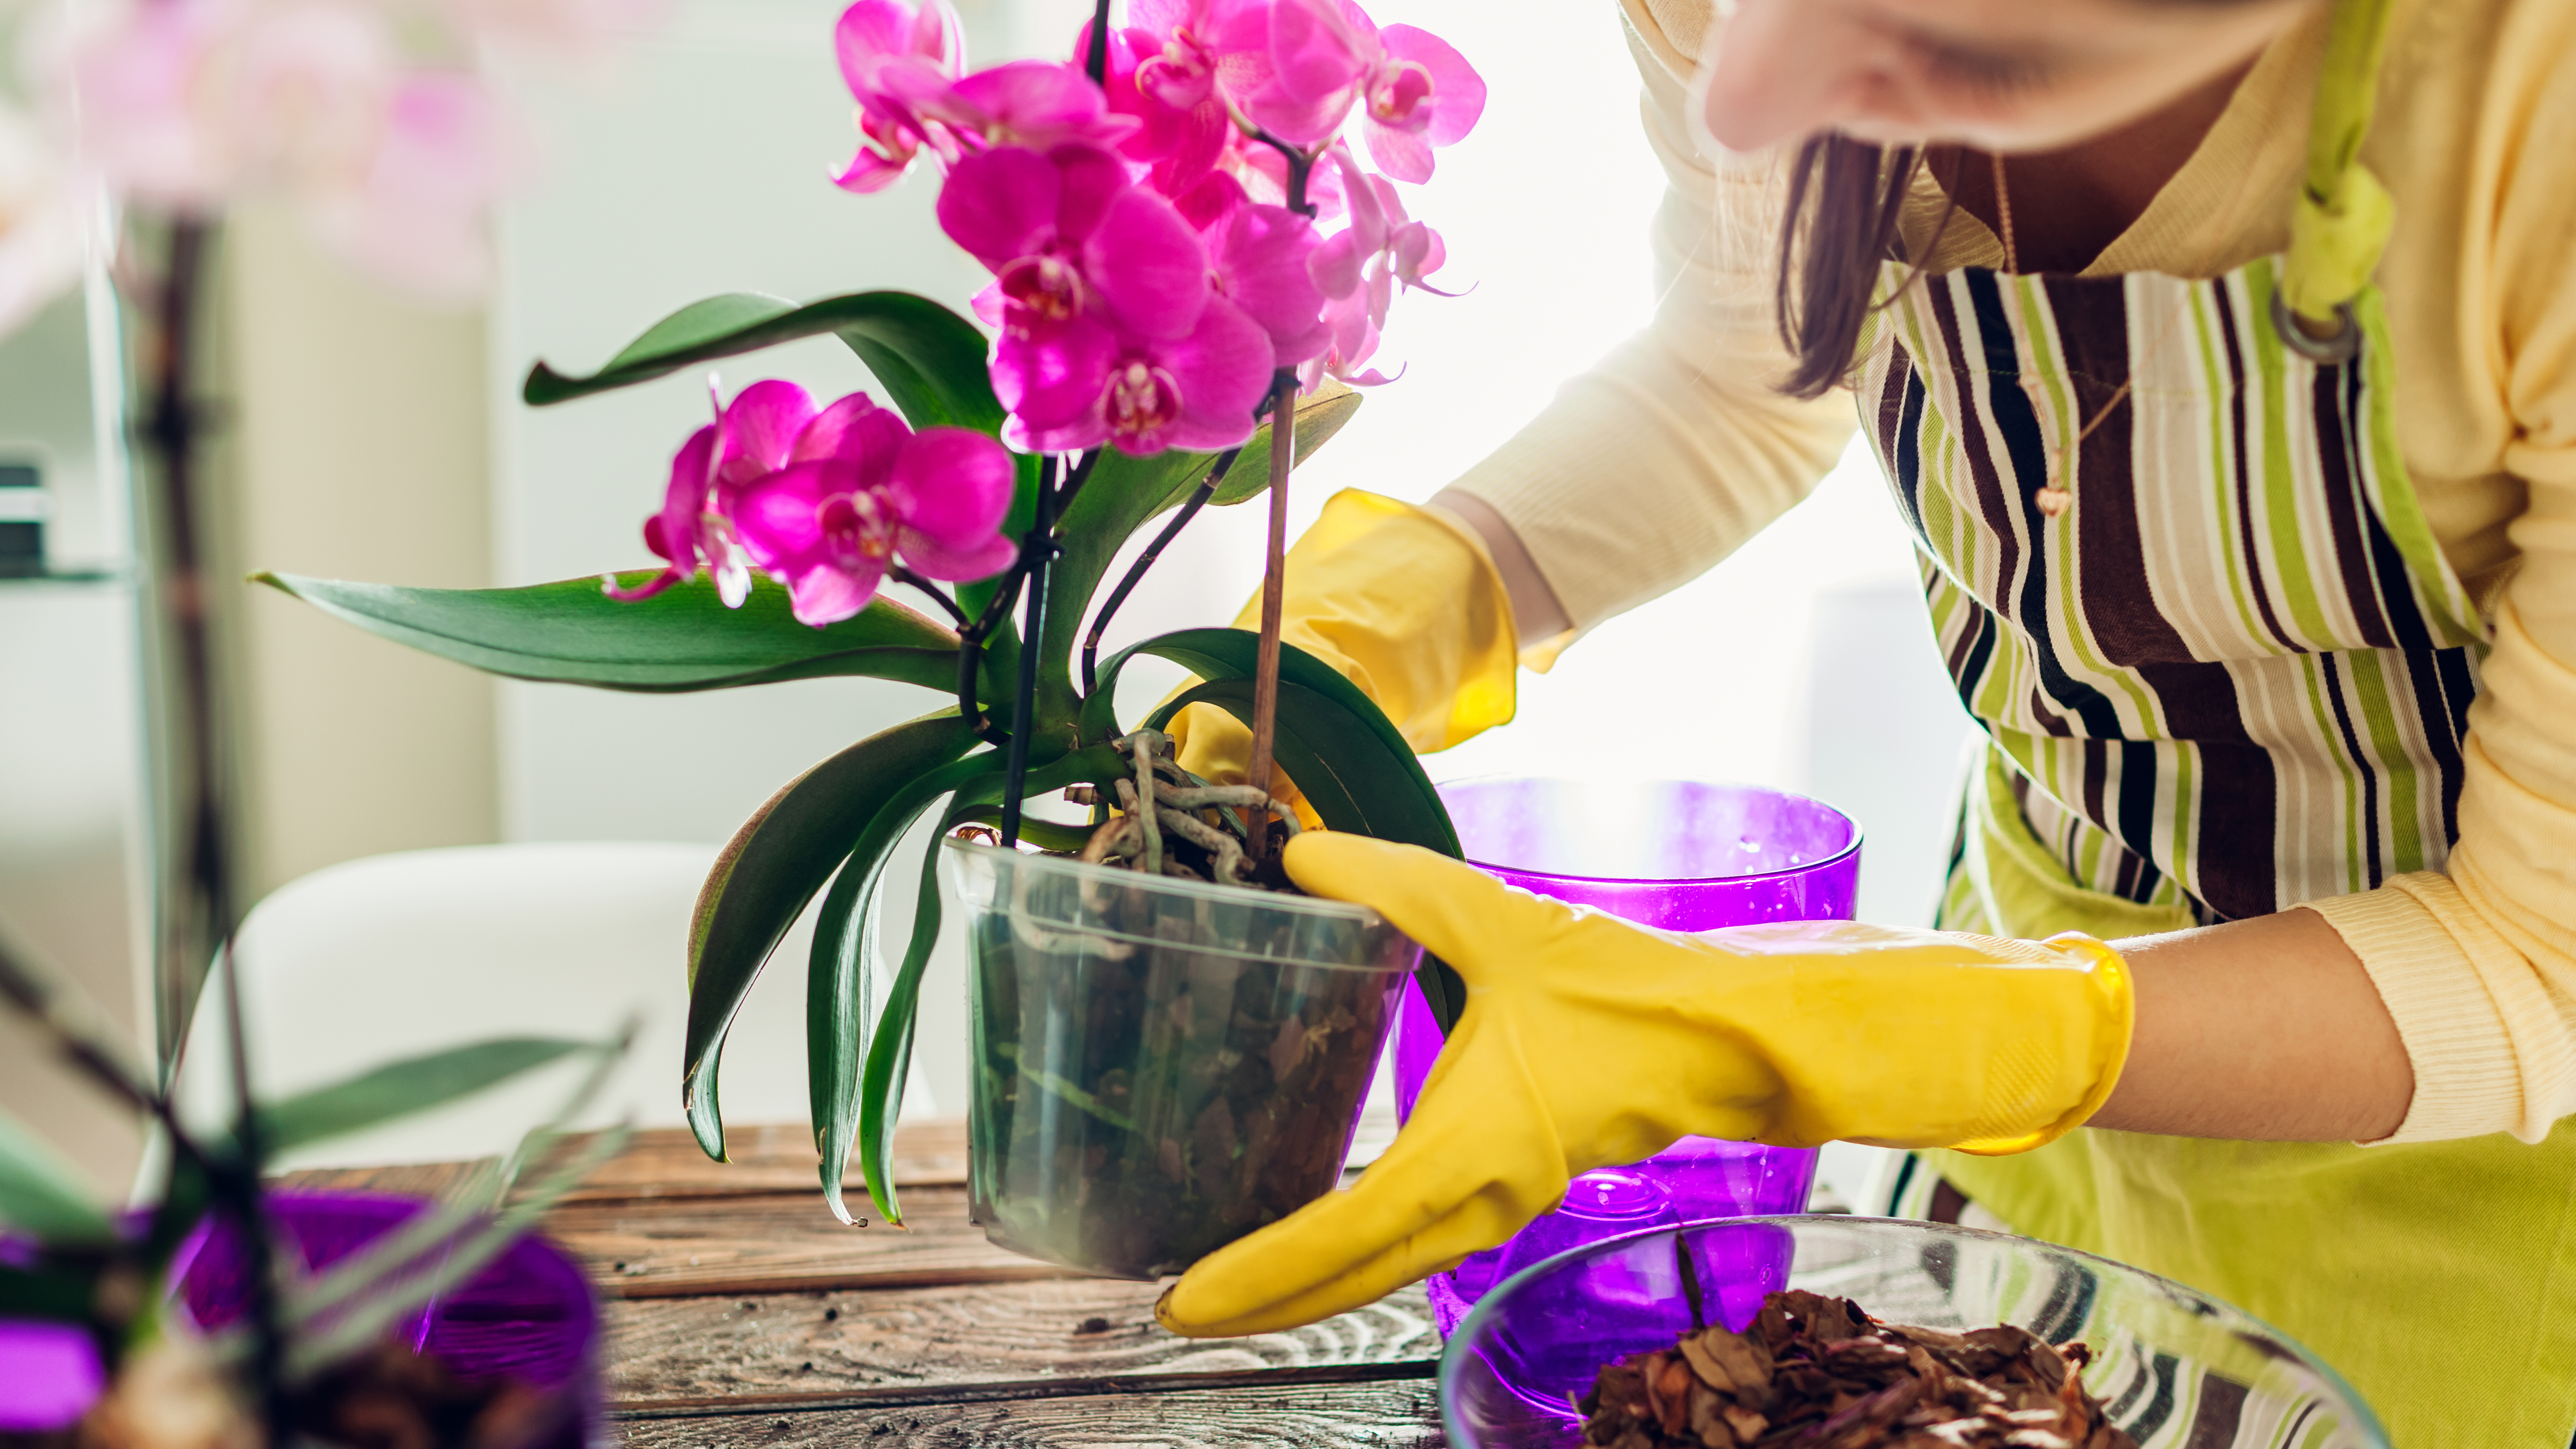 Repotting an orchid